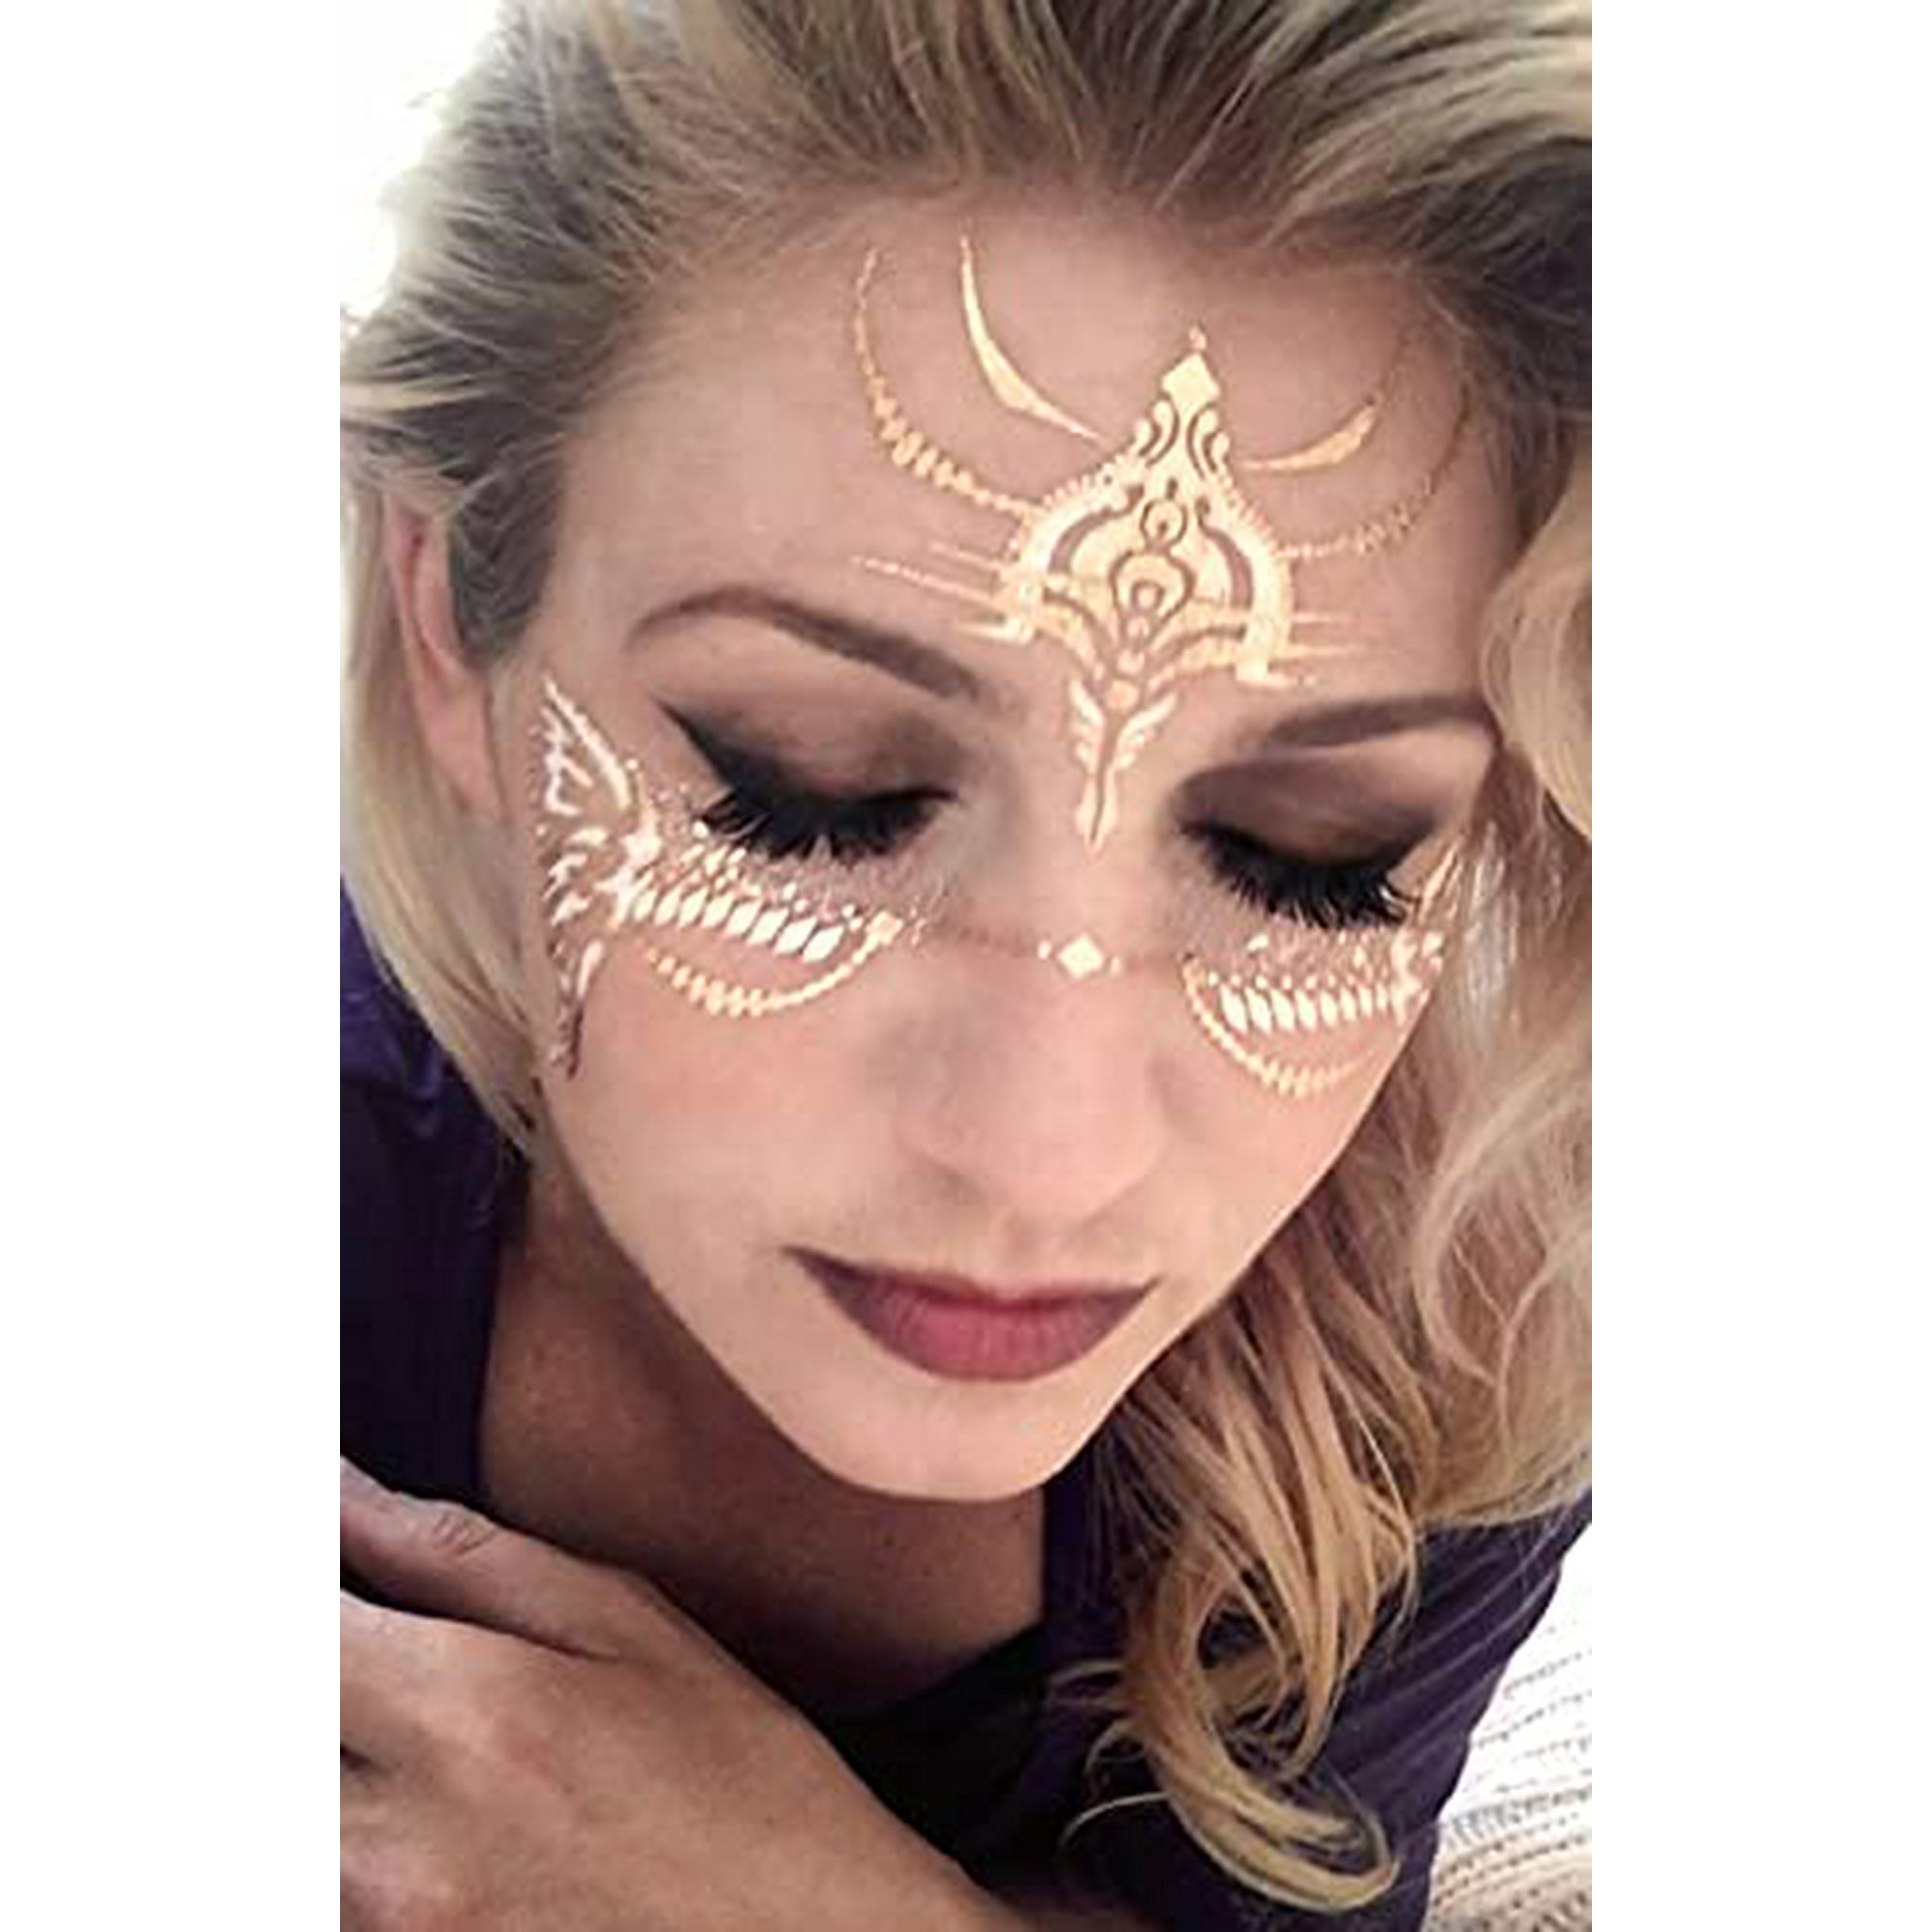 Golden Ratio Tats Best Page x3, Gold Temporary Tattoos, Boho, Face Paint,  Gold and White Masquerade Tattoos. | Walmart Canada